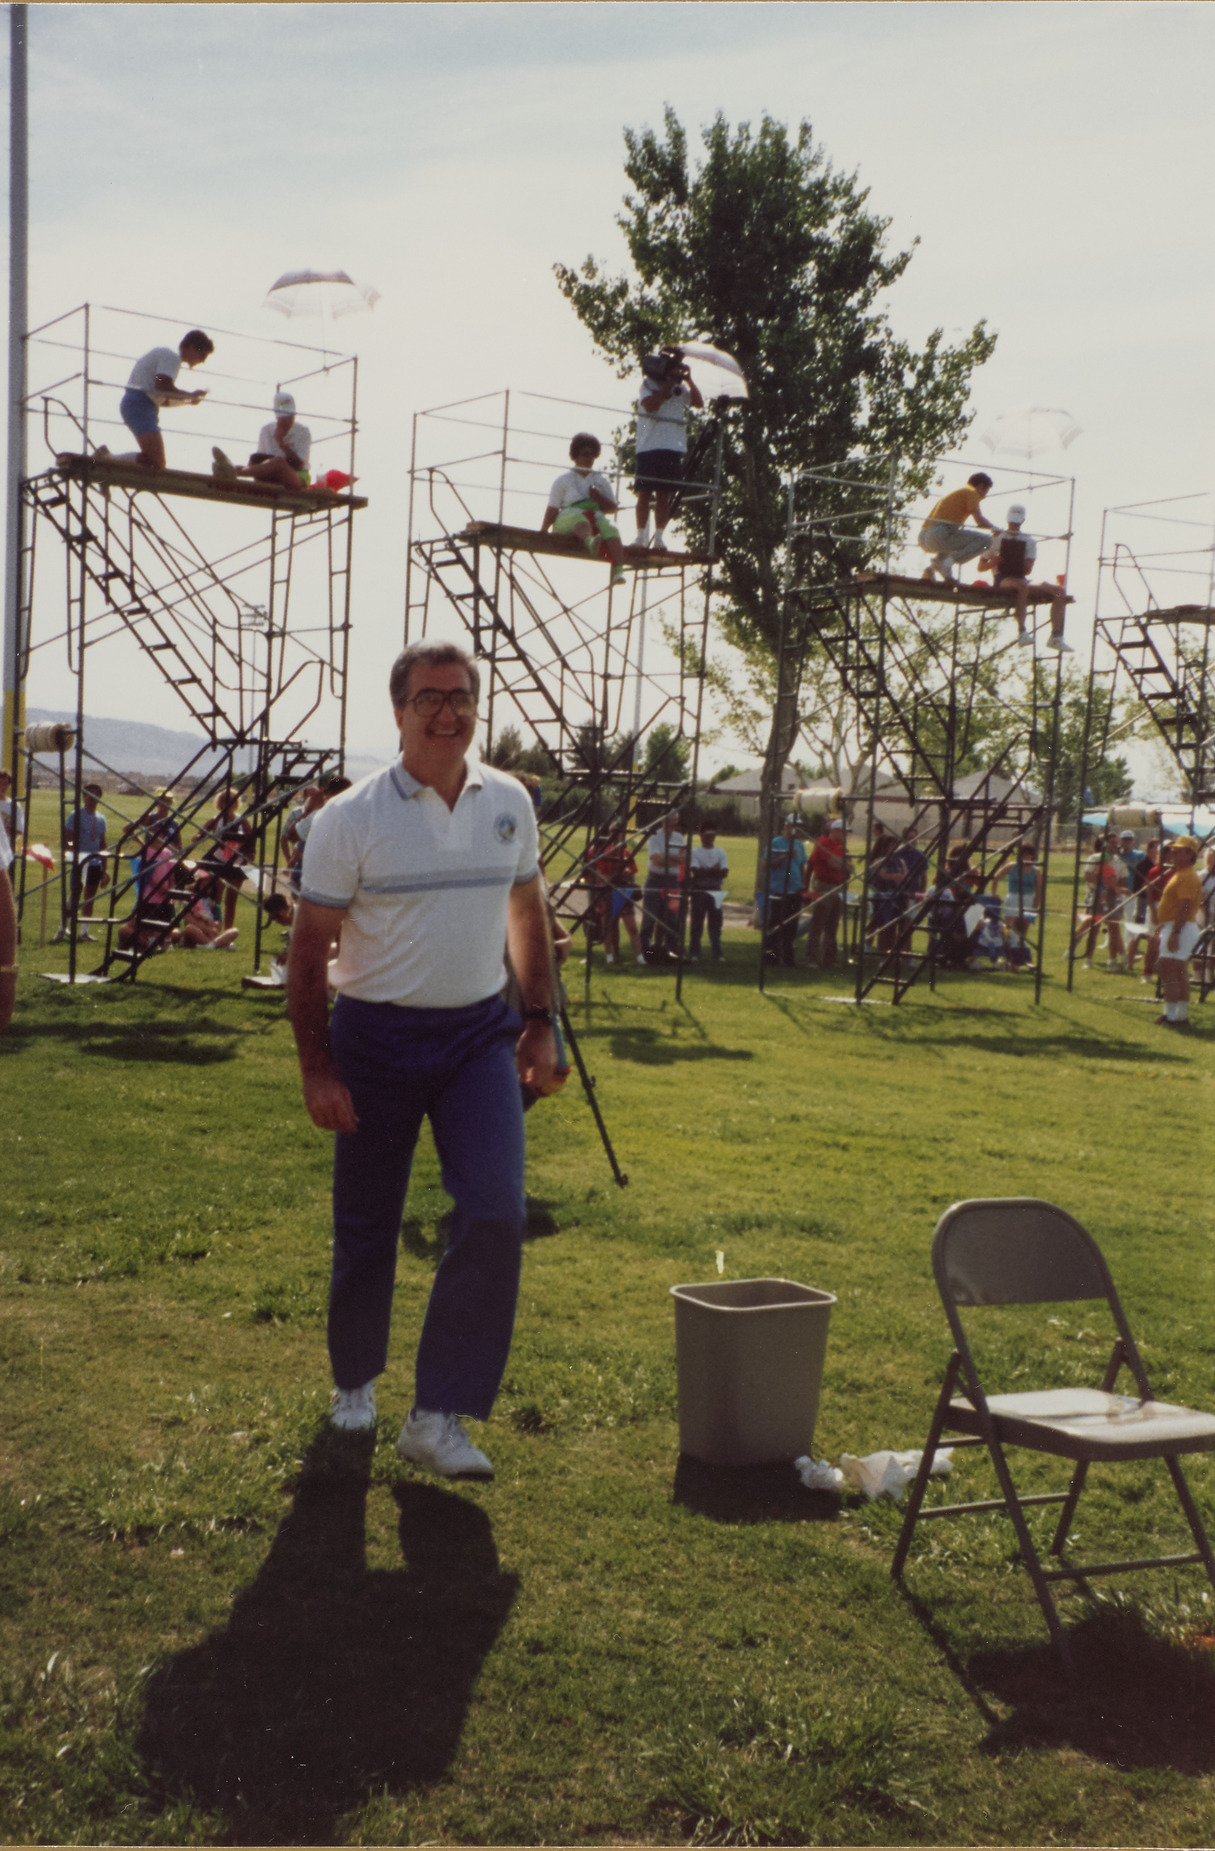 Photograph of Ron Lurie at obstacle course event